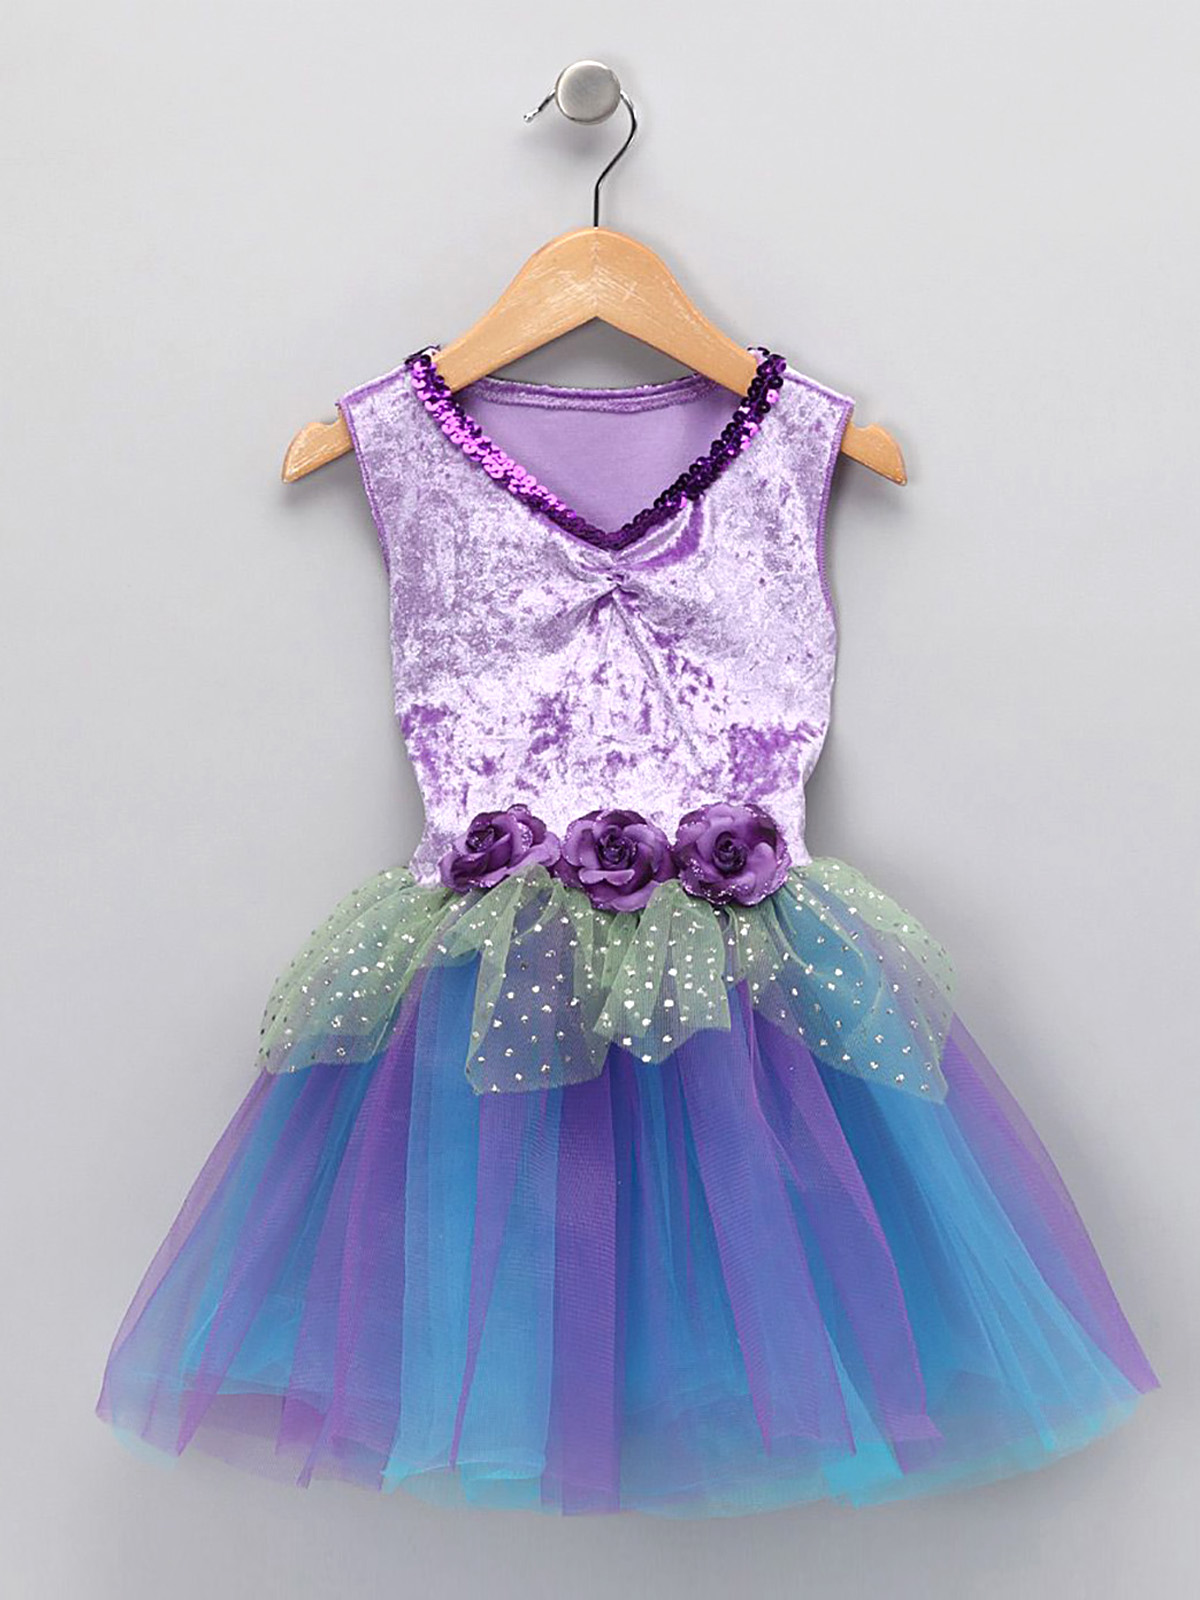 Princess Expressions - - Princess Expressions PURPLE Girls Sequin ...